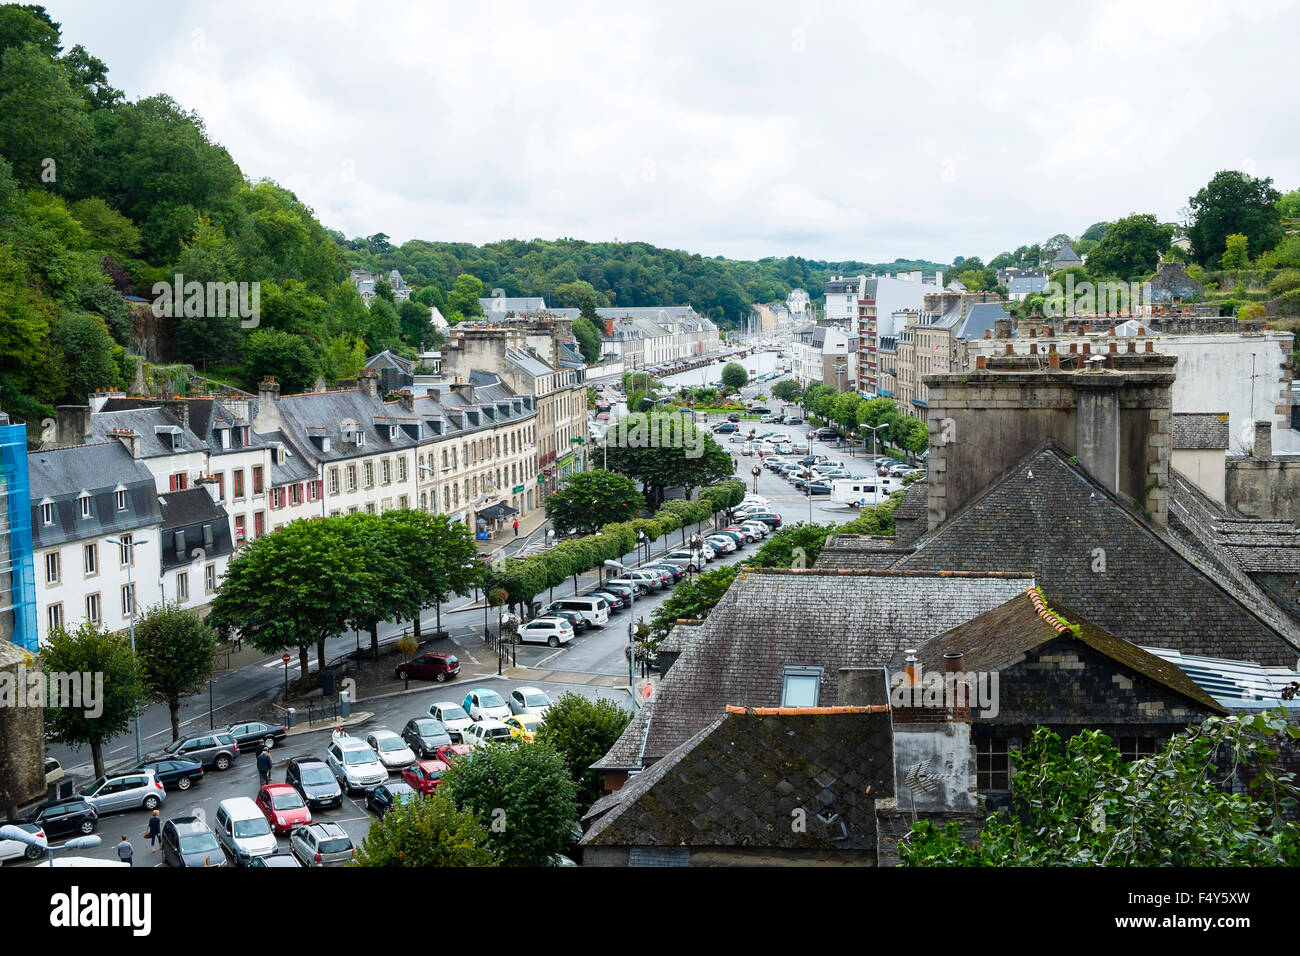 A view of the market place in Morlaix, France Stock Photo - Alamy